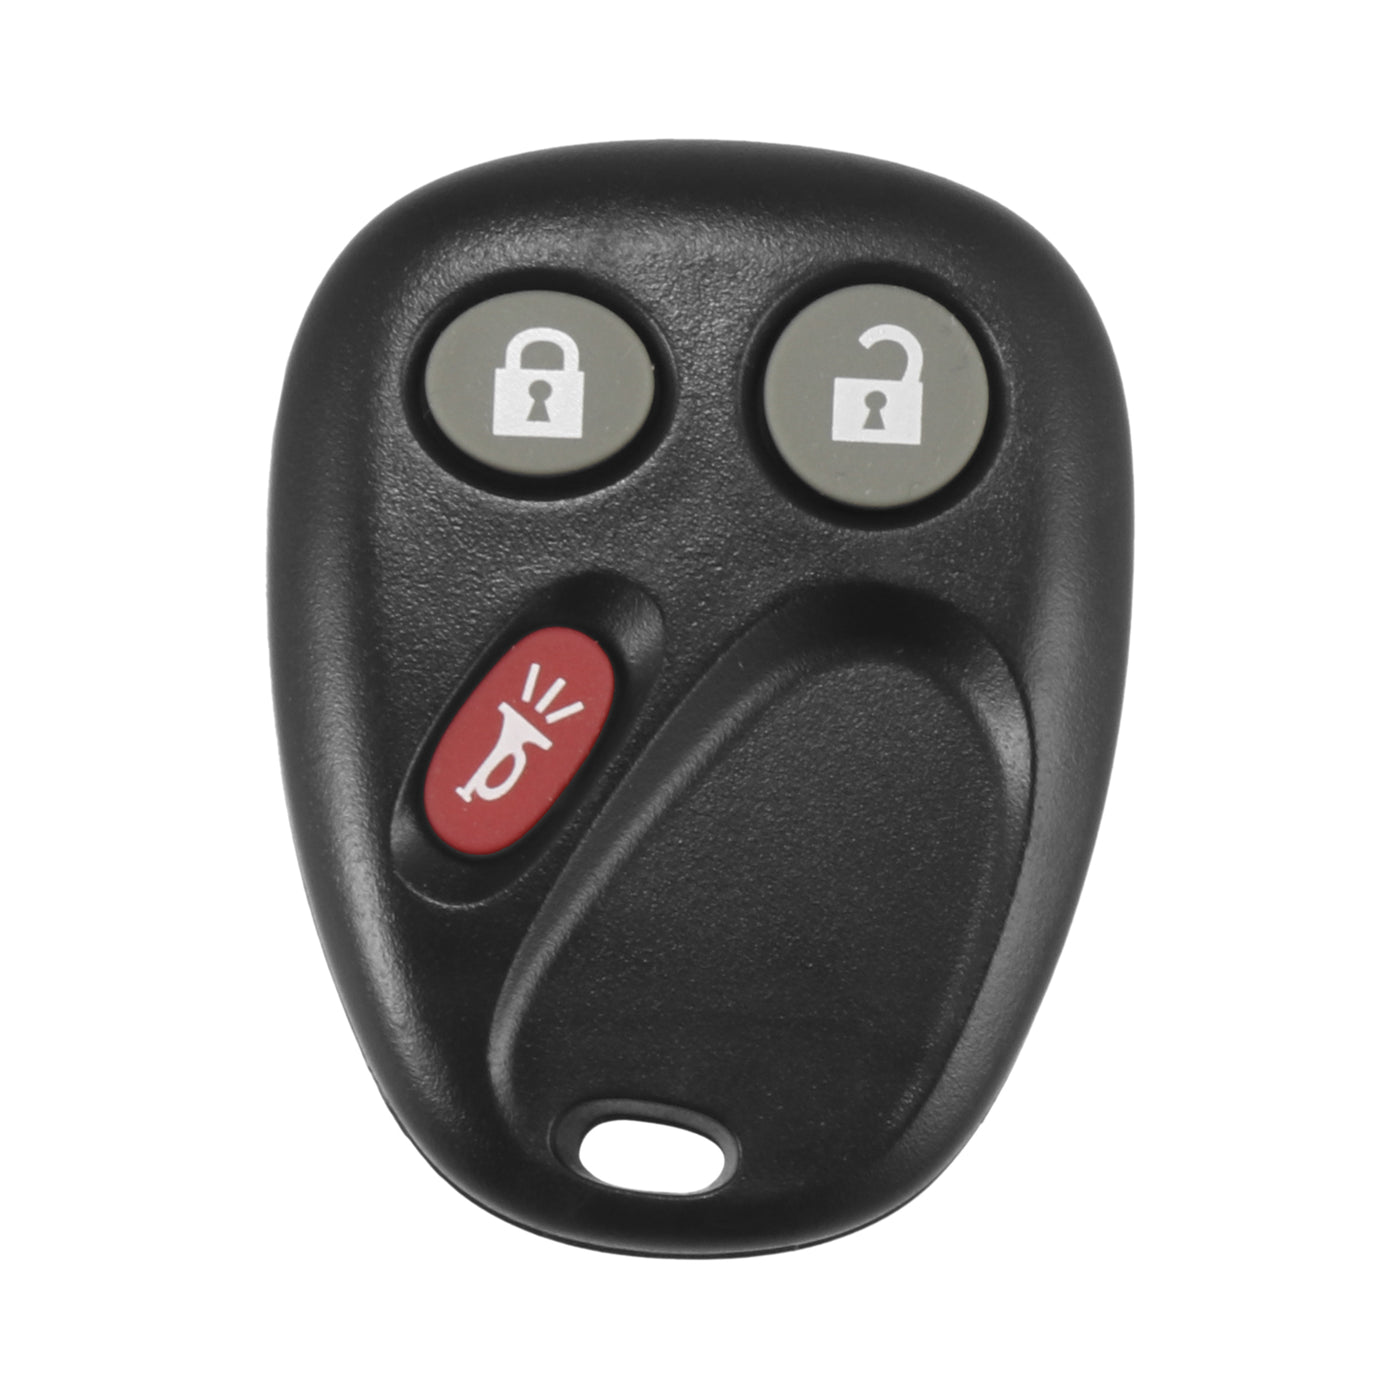 X AUTOHAUX 315MHz LHJ011 Replacement Keyless Entry Remote Car Key Fob for Chevrolet Silverado Suburban Tahoe Avalanche Escalade for GMC Sierra 2500 HD 2003-2006 3 Buttons